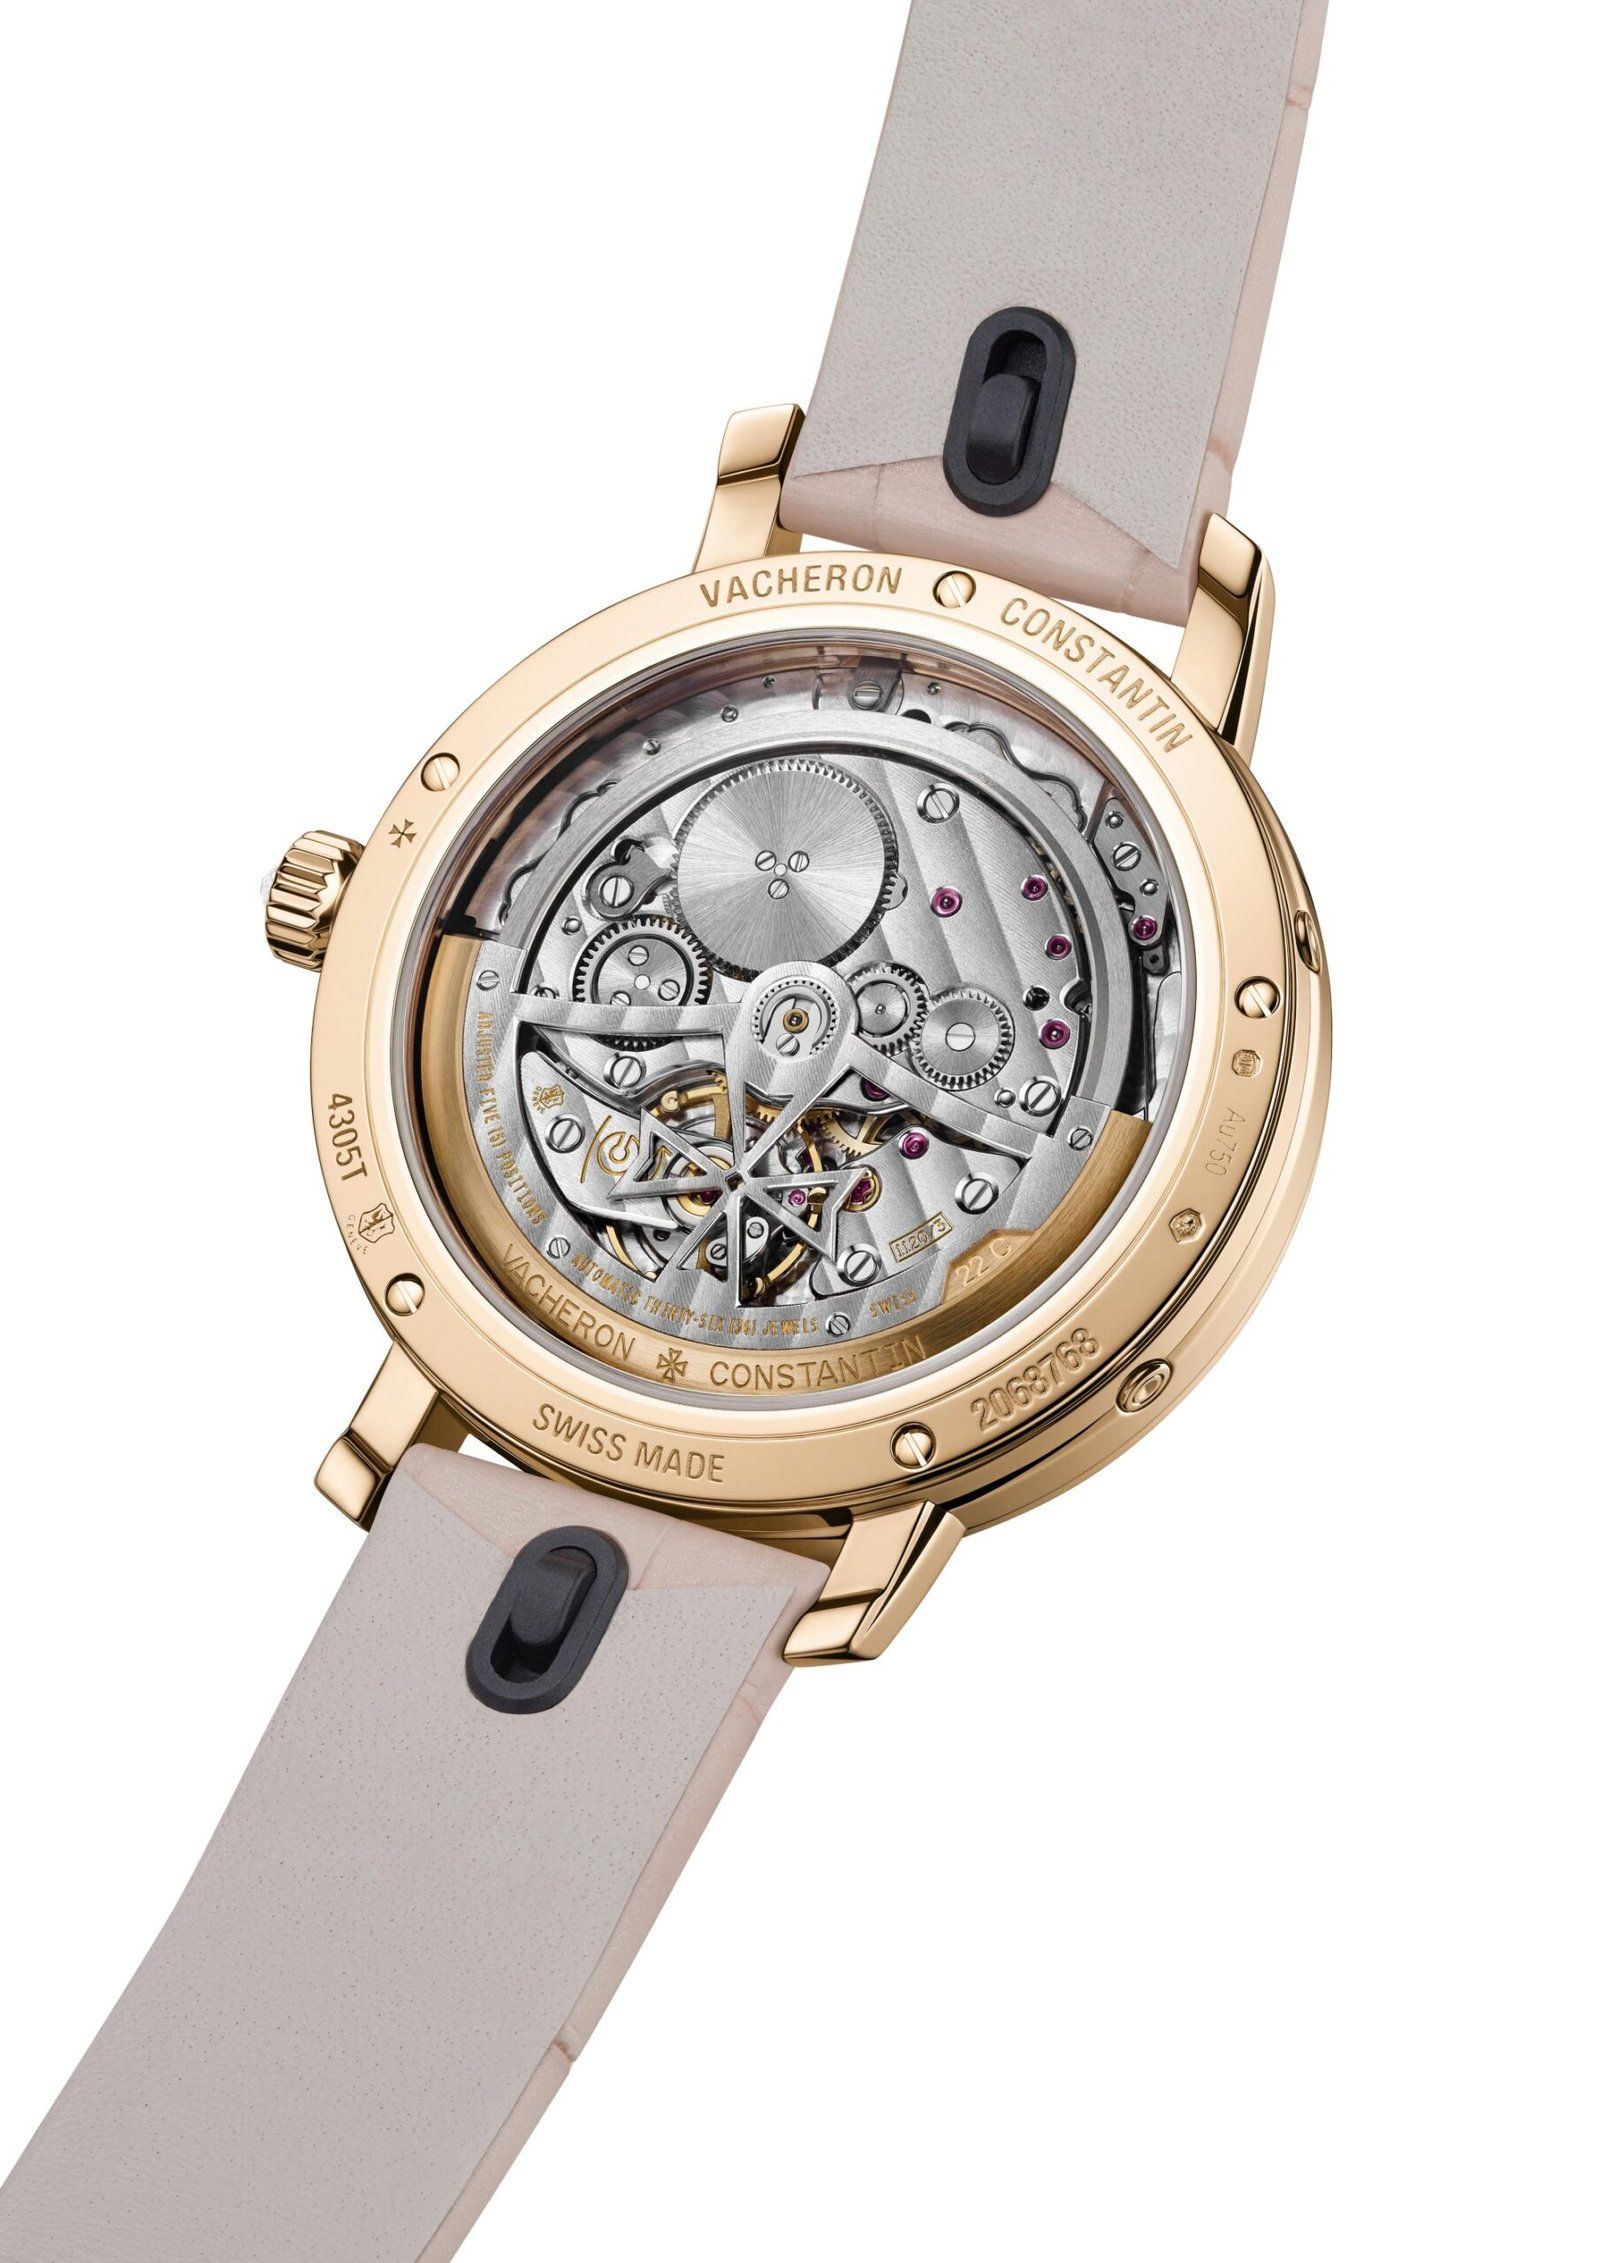 Movement visible through the sapphire crystal case back